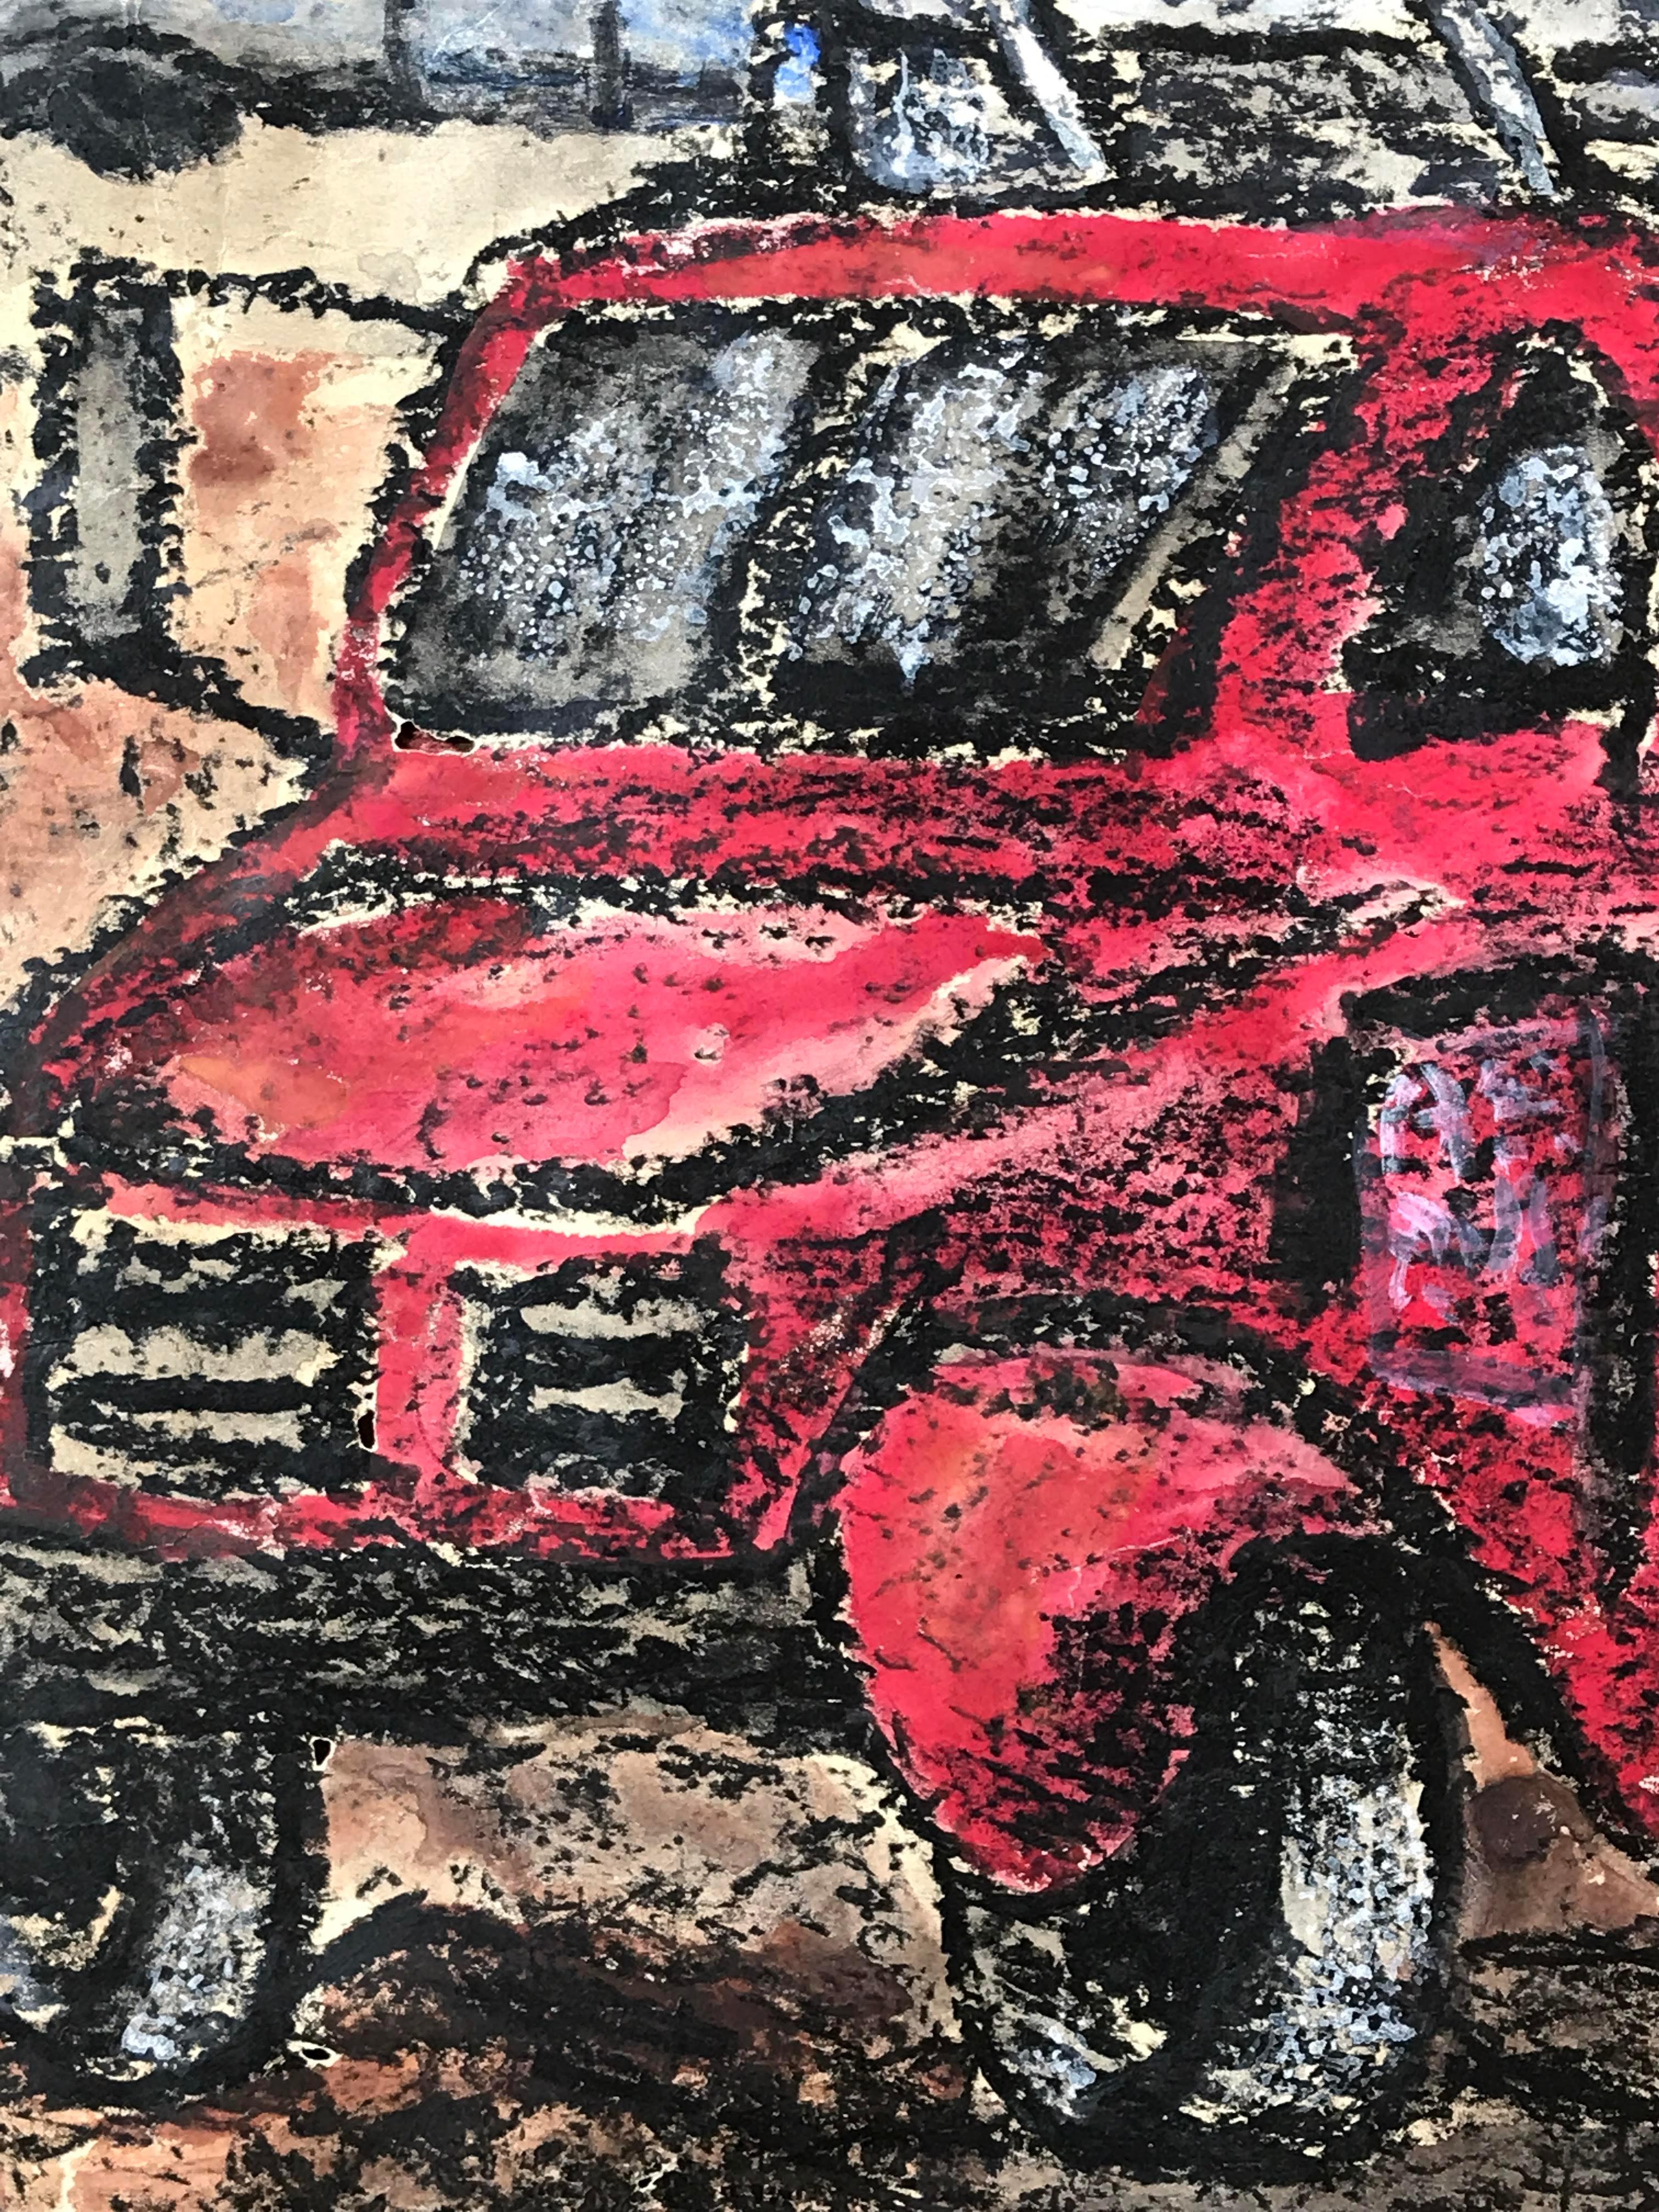 Gloria Dudfield
Construction Workers and Red Truck
6-16-64
Pastel and Watercolor
41 1/2